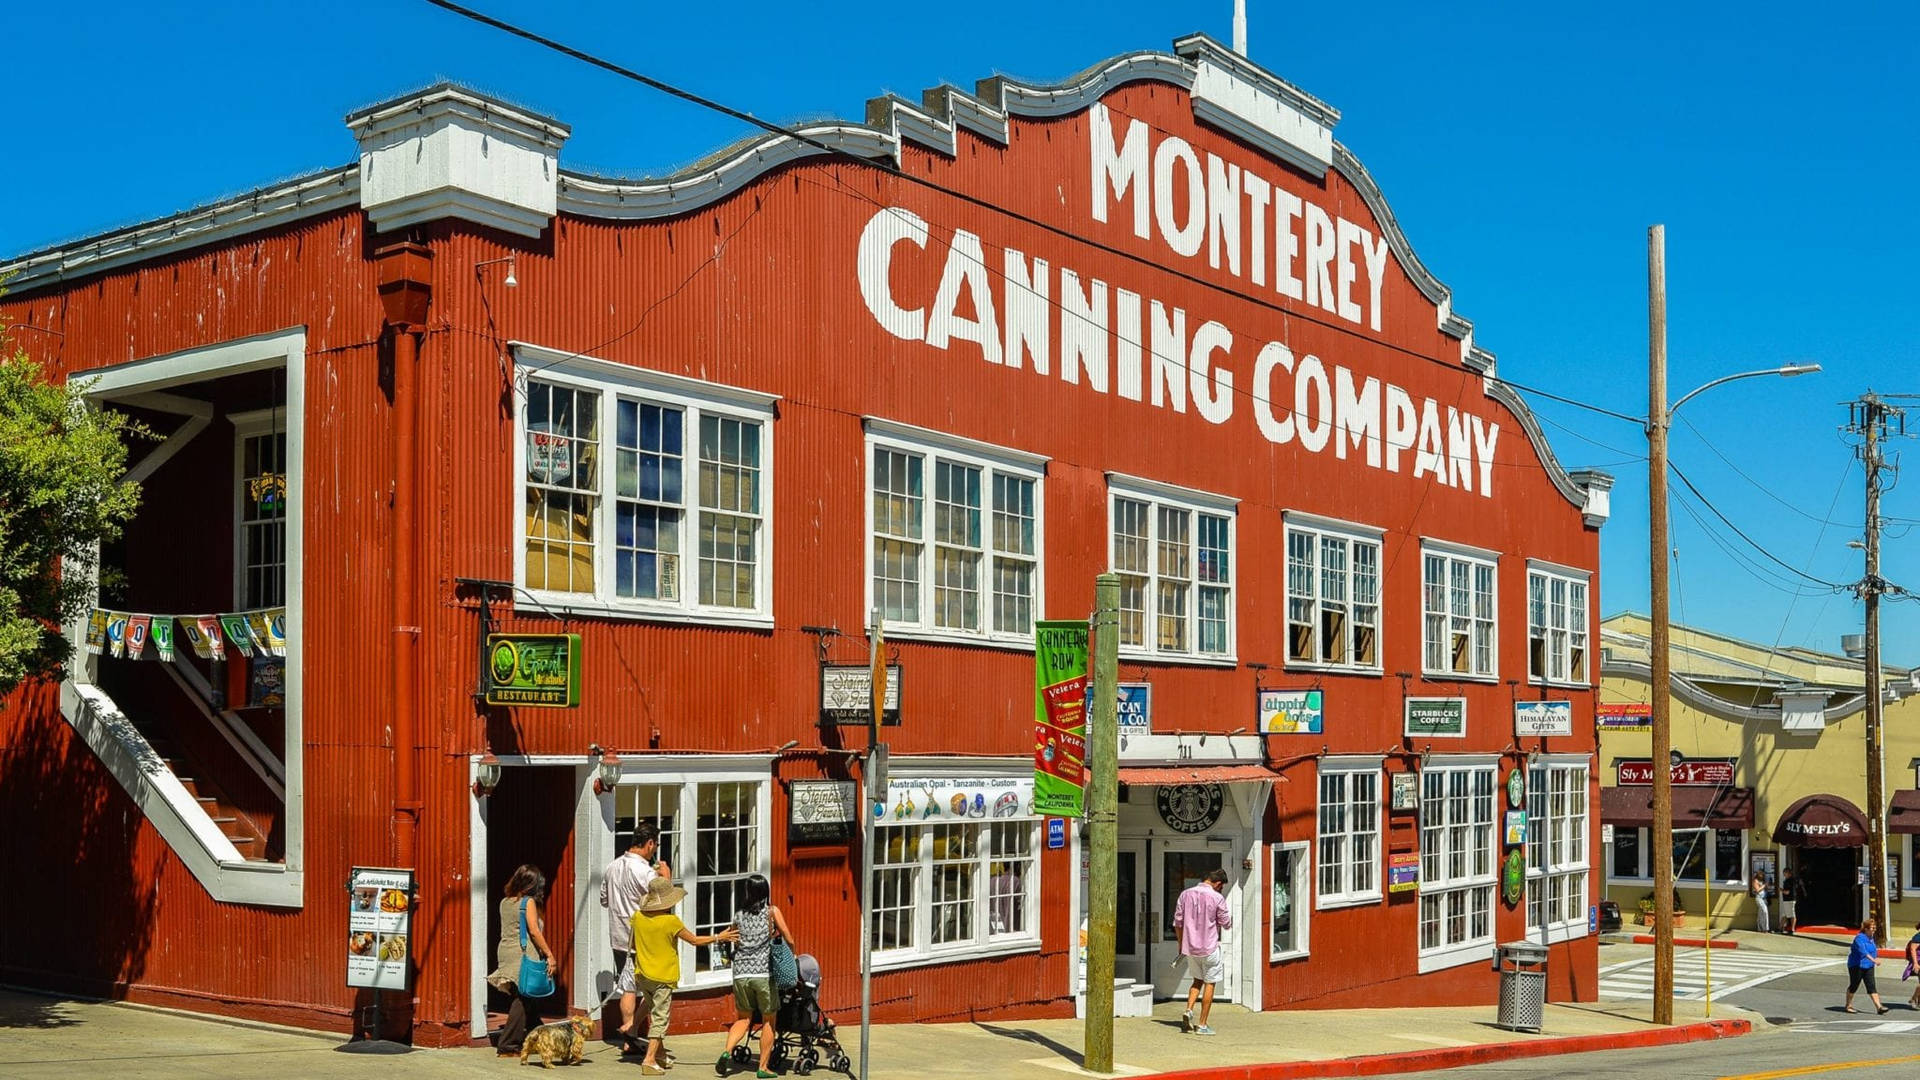 Montereycannings Byggnad I Cannery Row. Wallpaper